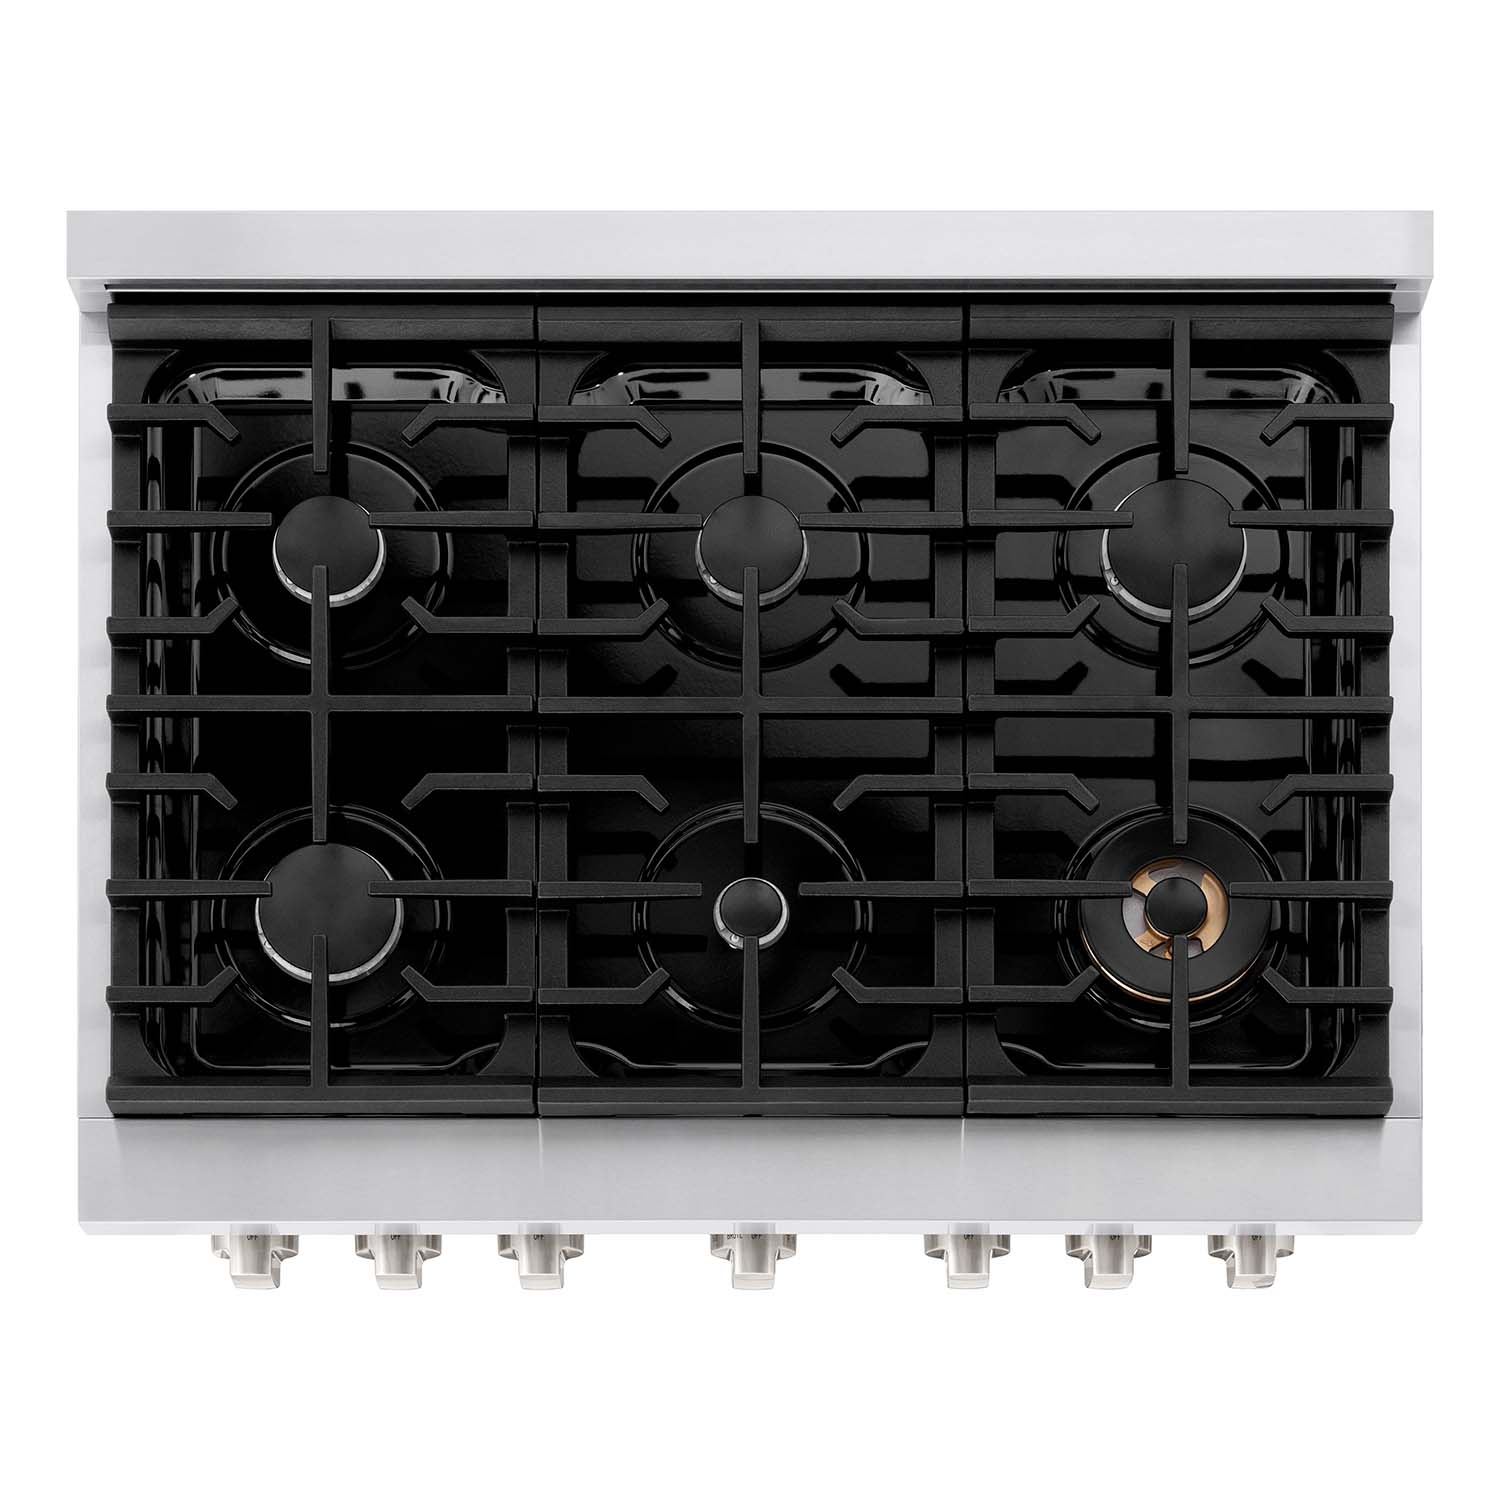 ZLINE 36 in. 5.2 cu. ft. 6 Burner Gas Range with Convection Gas Oven in Stainless Steel (SGR36) from above, showing gas burners, black porcelain cooktop, and cast-iron grates.